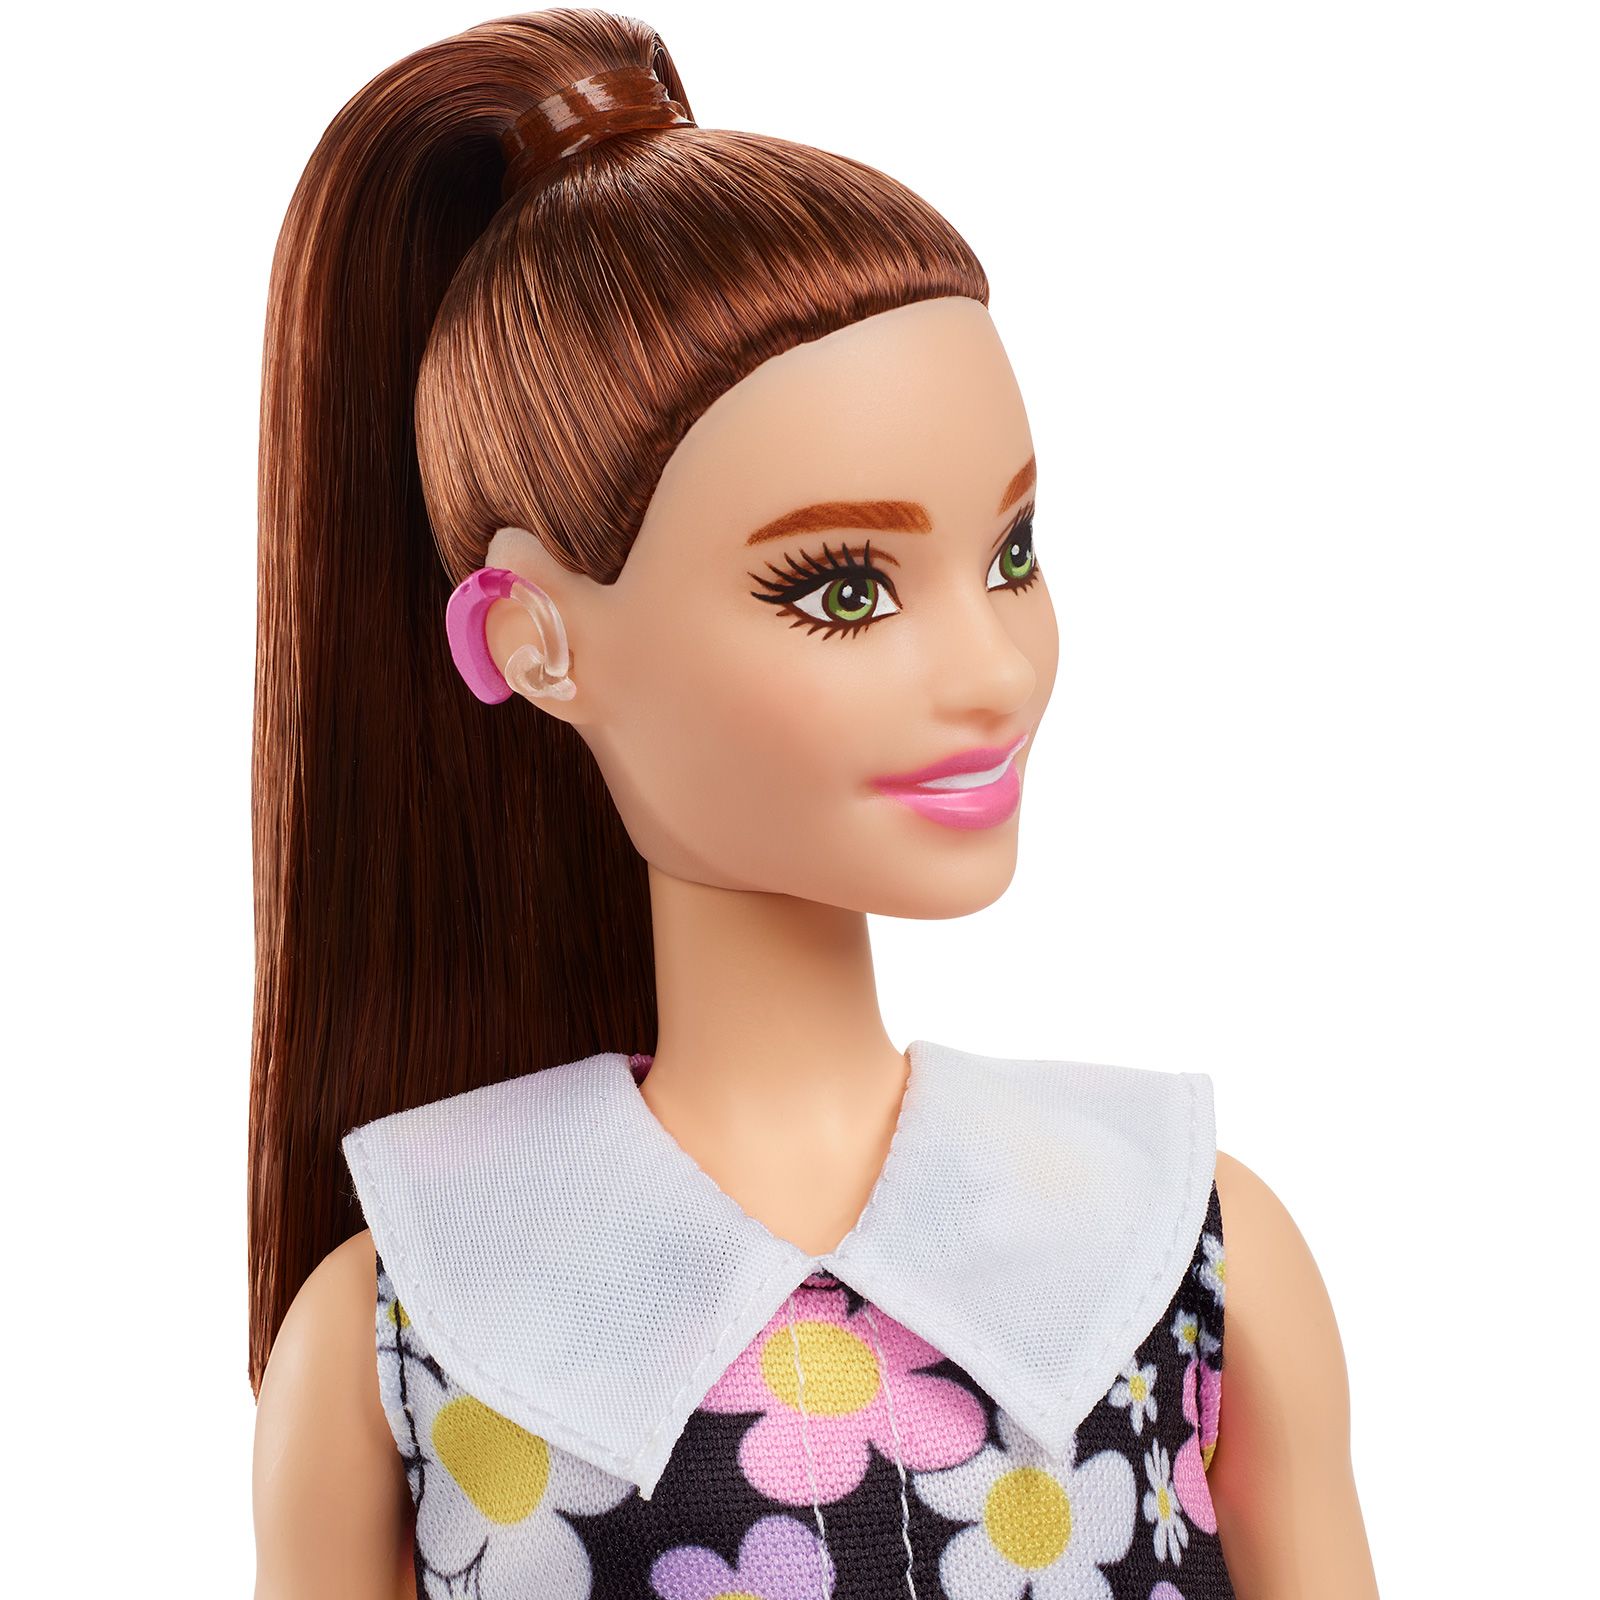 Chapoteo granizo alivio Barbie unveils its first-ever doll with hearing aids | CNN